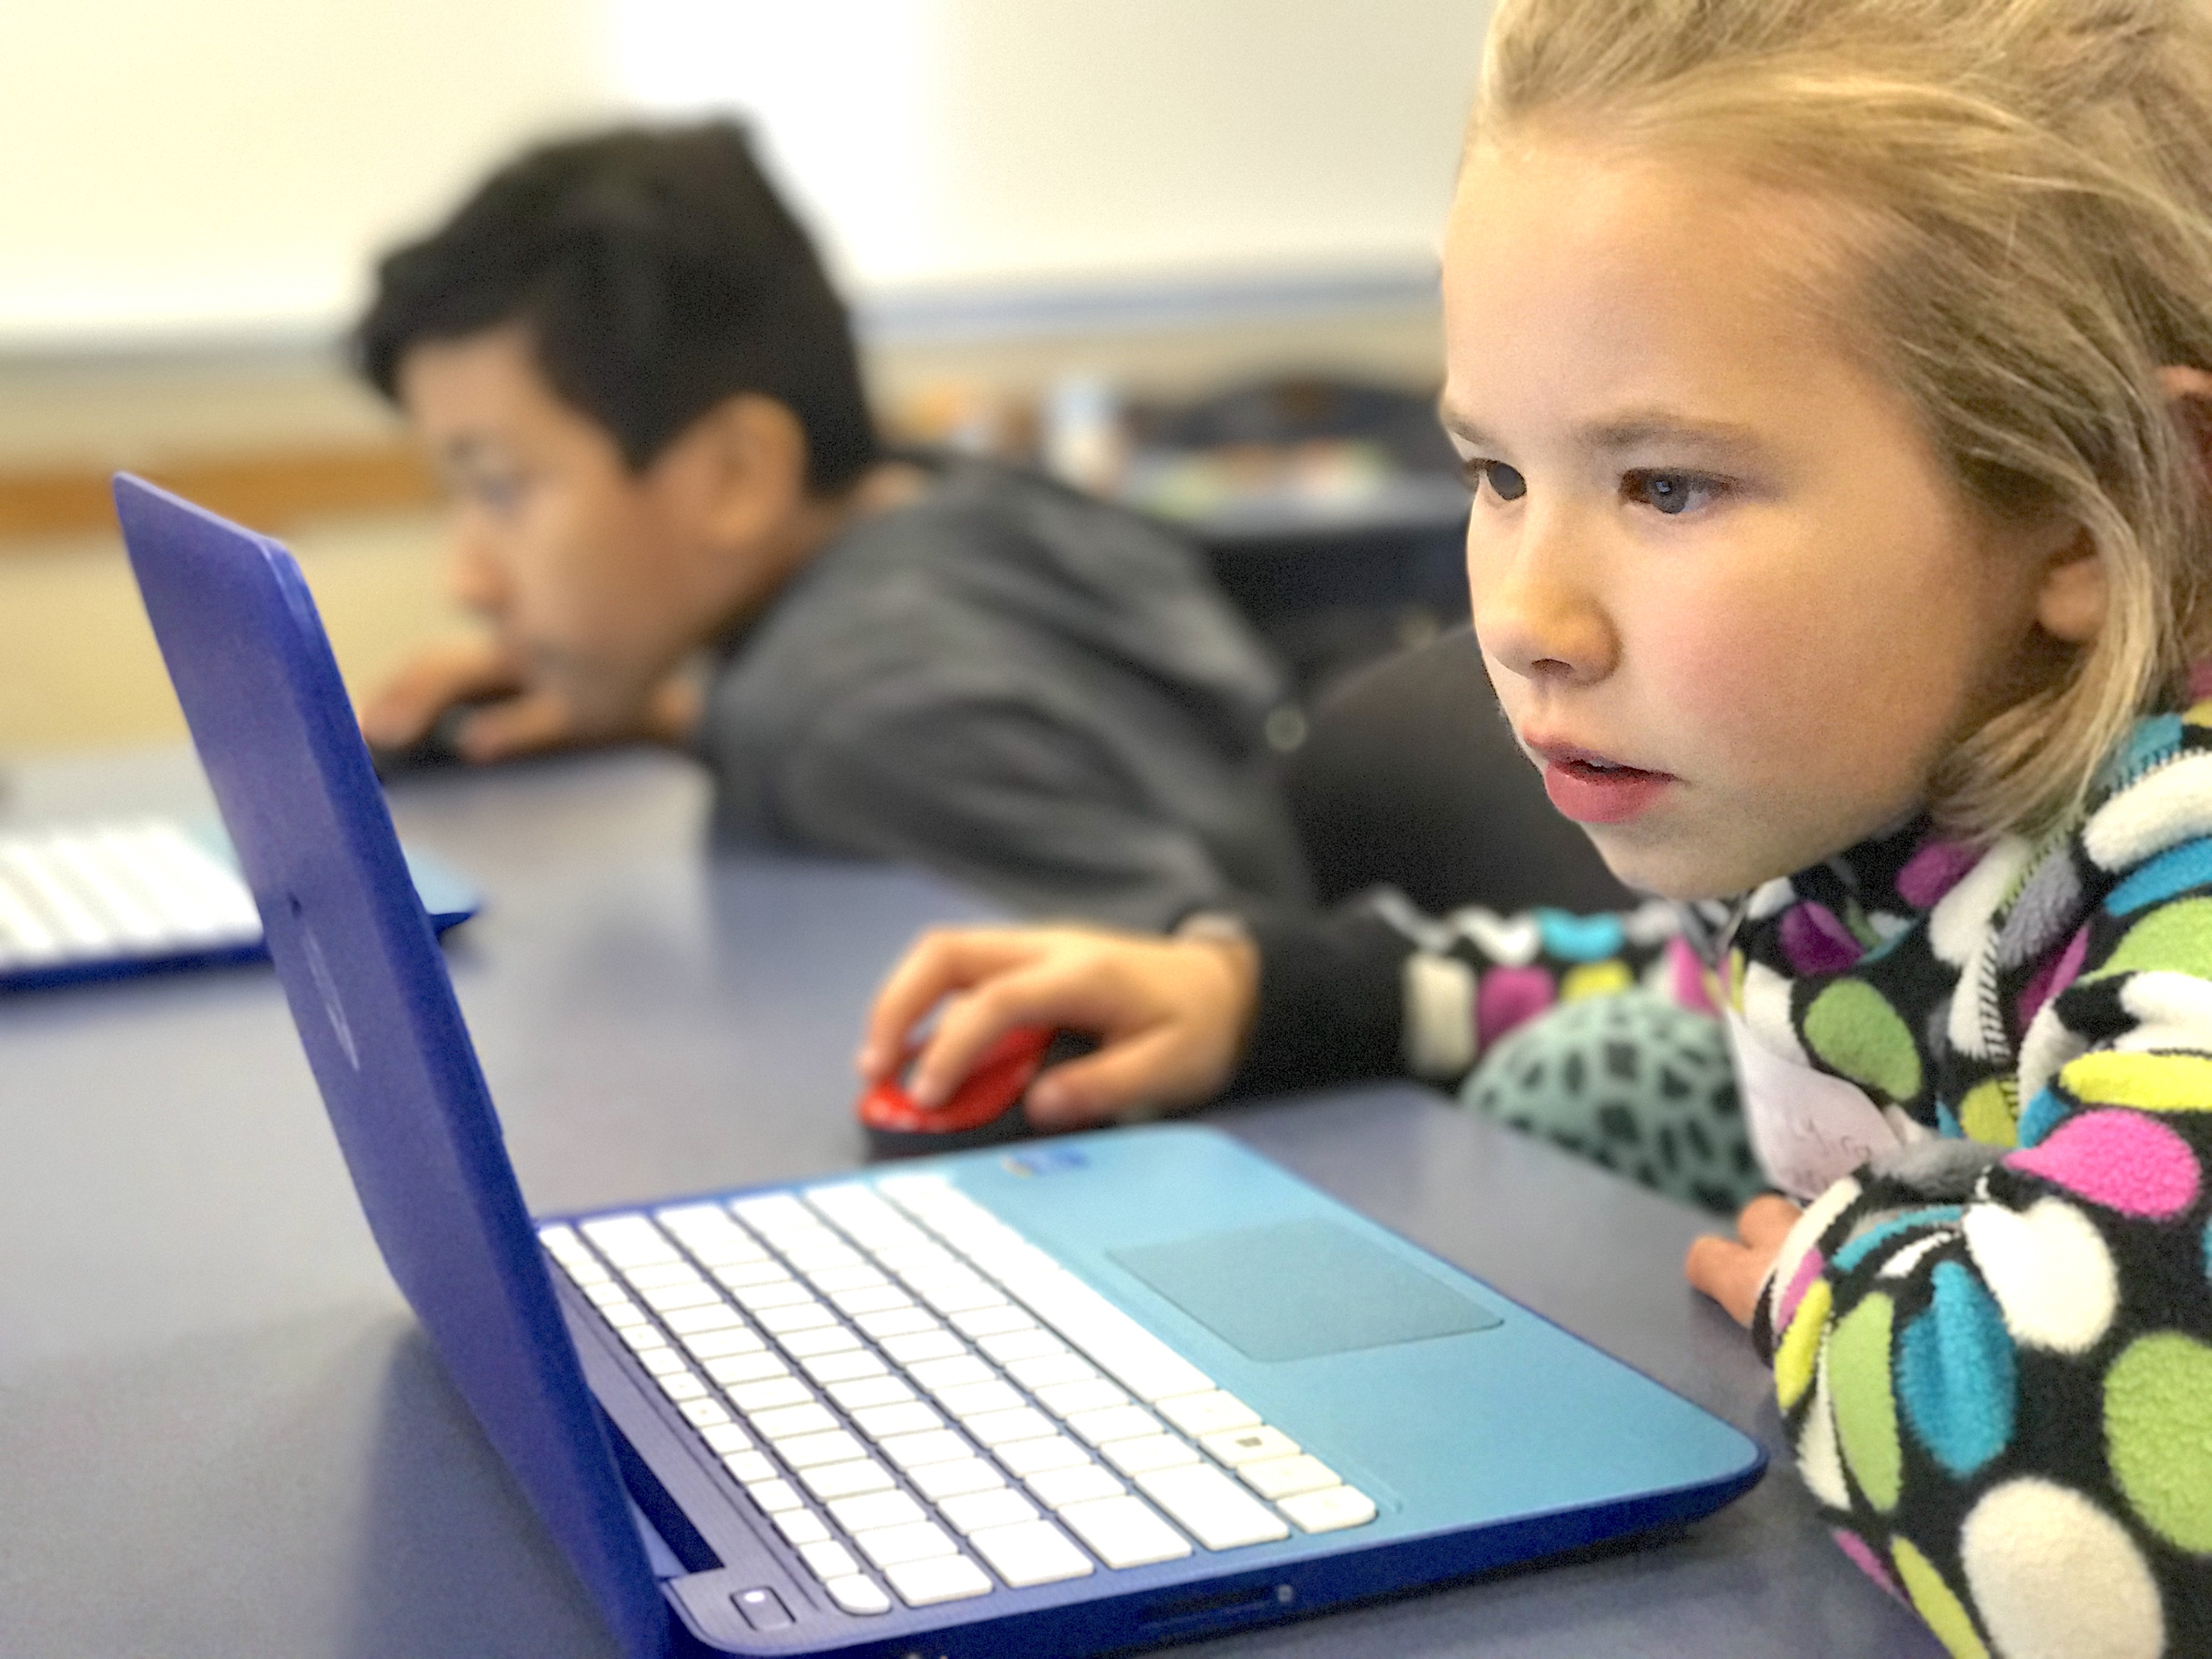 Girls can code - level up kids